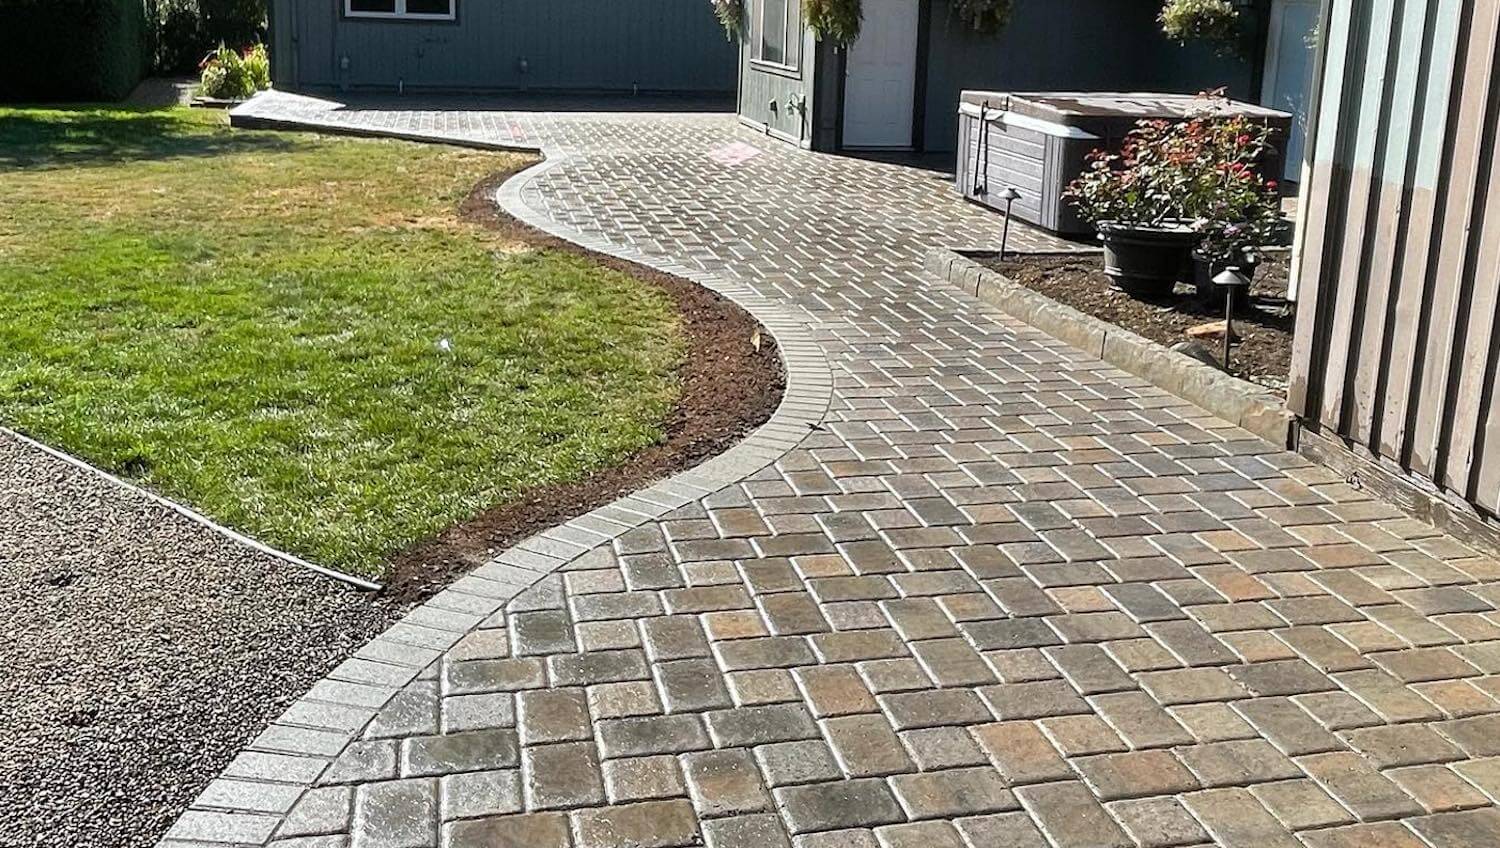 https://sequoiastonescapes.com/wp-content/uploads/How-to-Restore-Color-to-Brick-Pavers.jpg